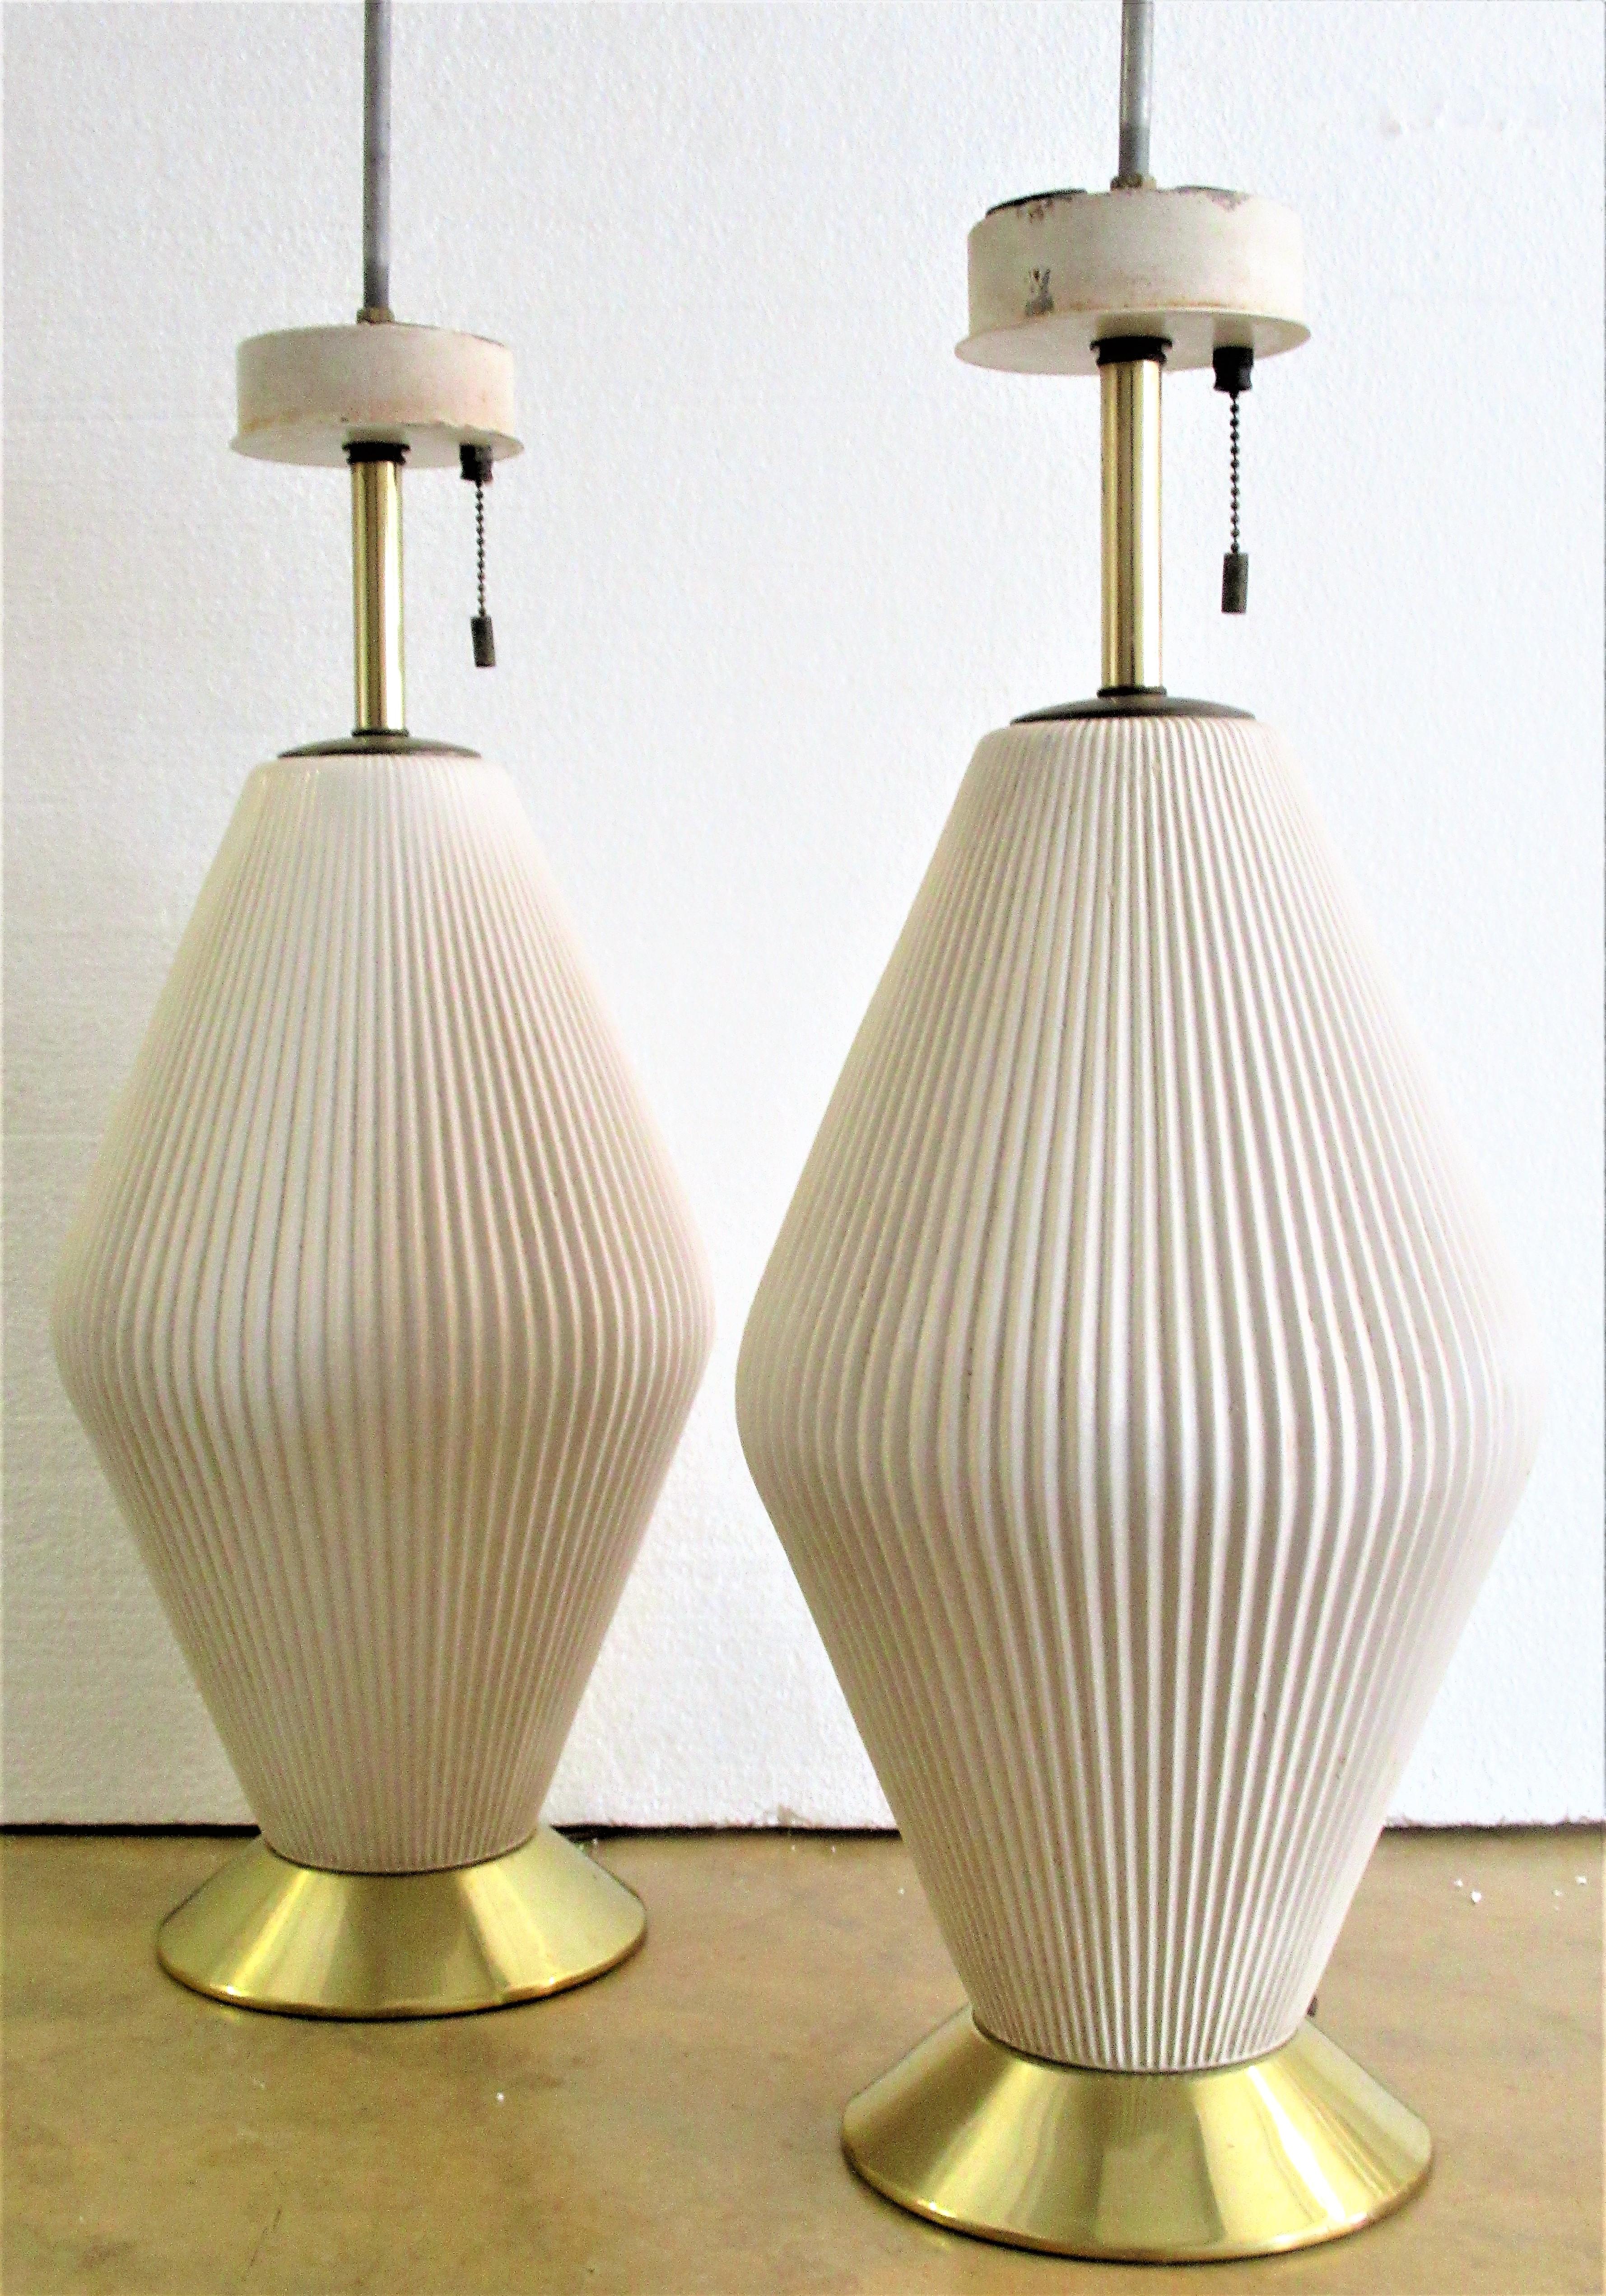 Mid-Century Modern Fluted Porcelain Table Lamps by Gerald Thurston for Lightolier